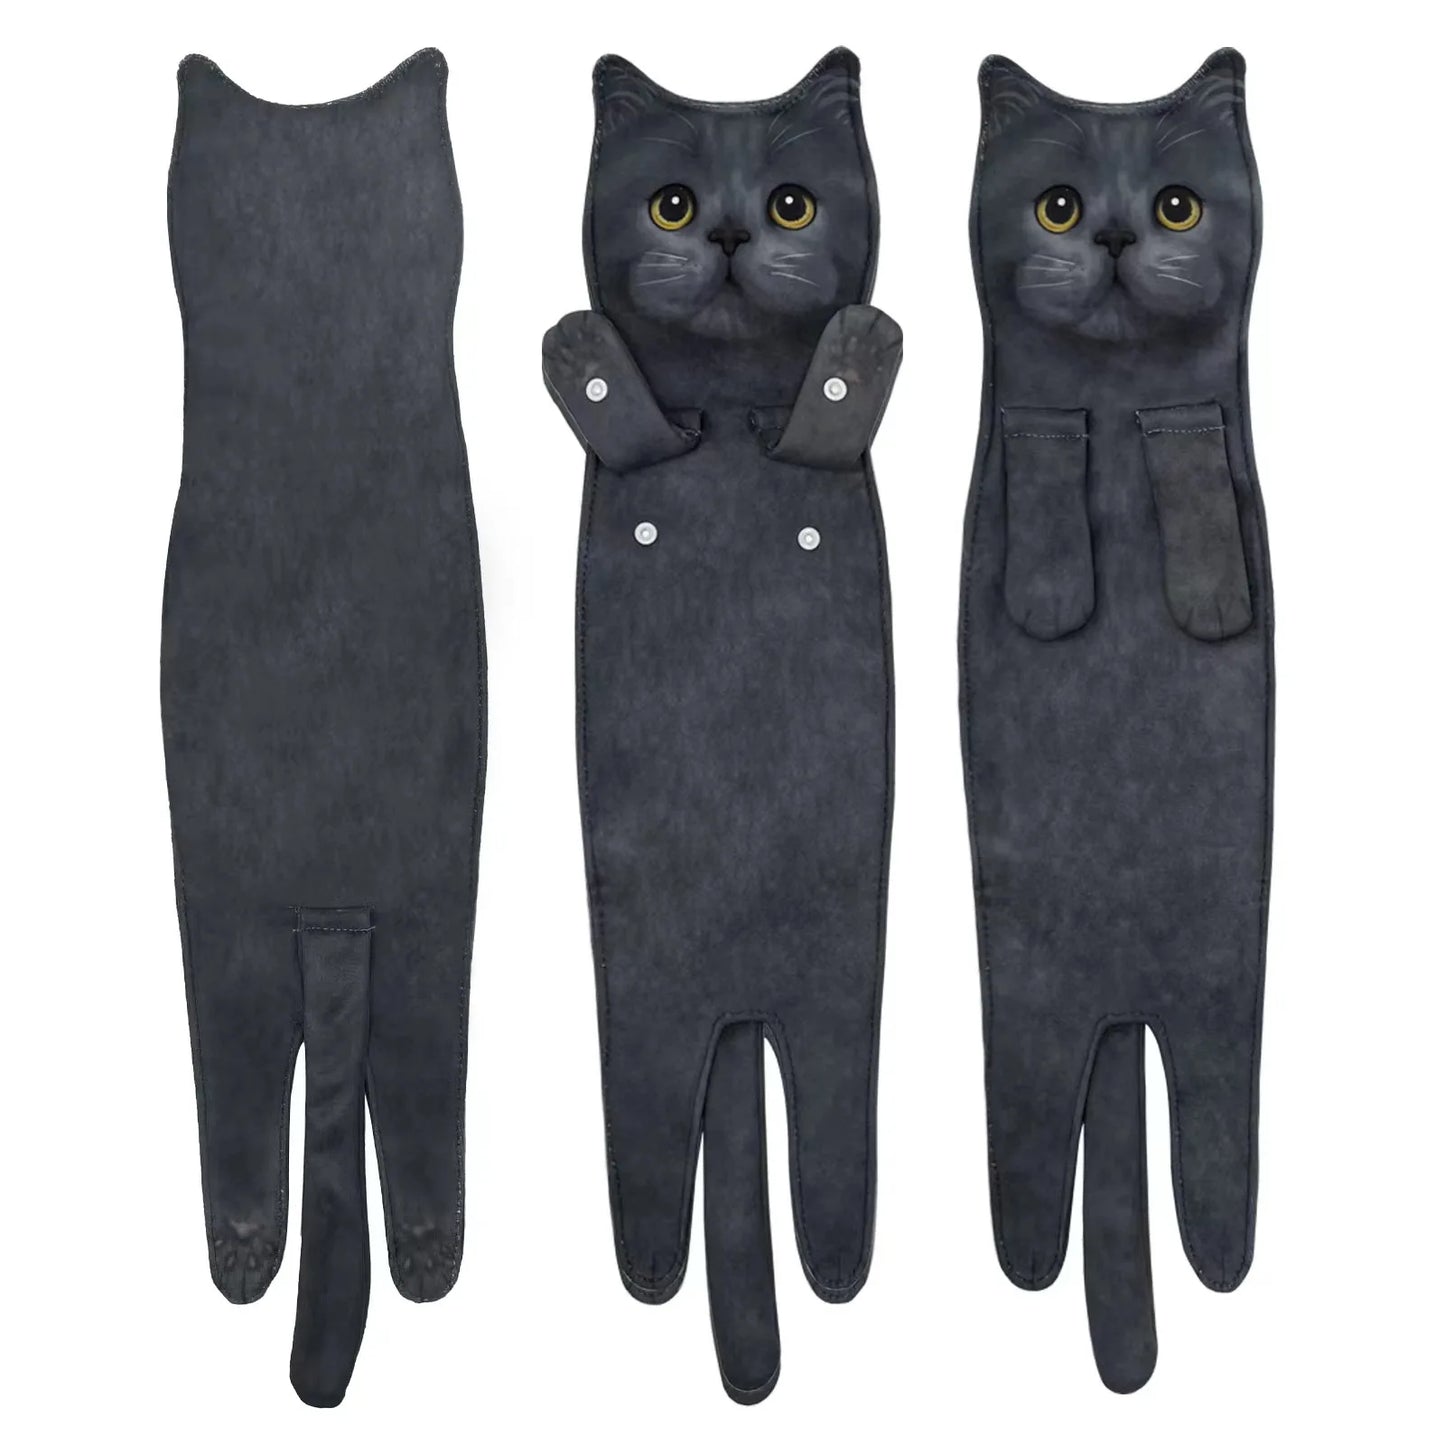 Creative and Humorous Cat-Themed Hand Towels: Soft, Absorbent, and Perfect for Your Kitchen or Bathroom - Nekoby Creative and Humorous Cat-Themed Hand Towels: Soft, Absorbent, and Perfect for Your Kitchen or Bathroom blue cat||14 / CHINA||200007763